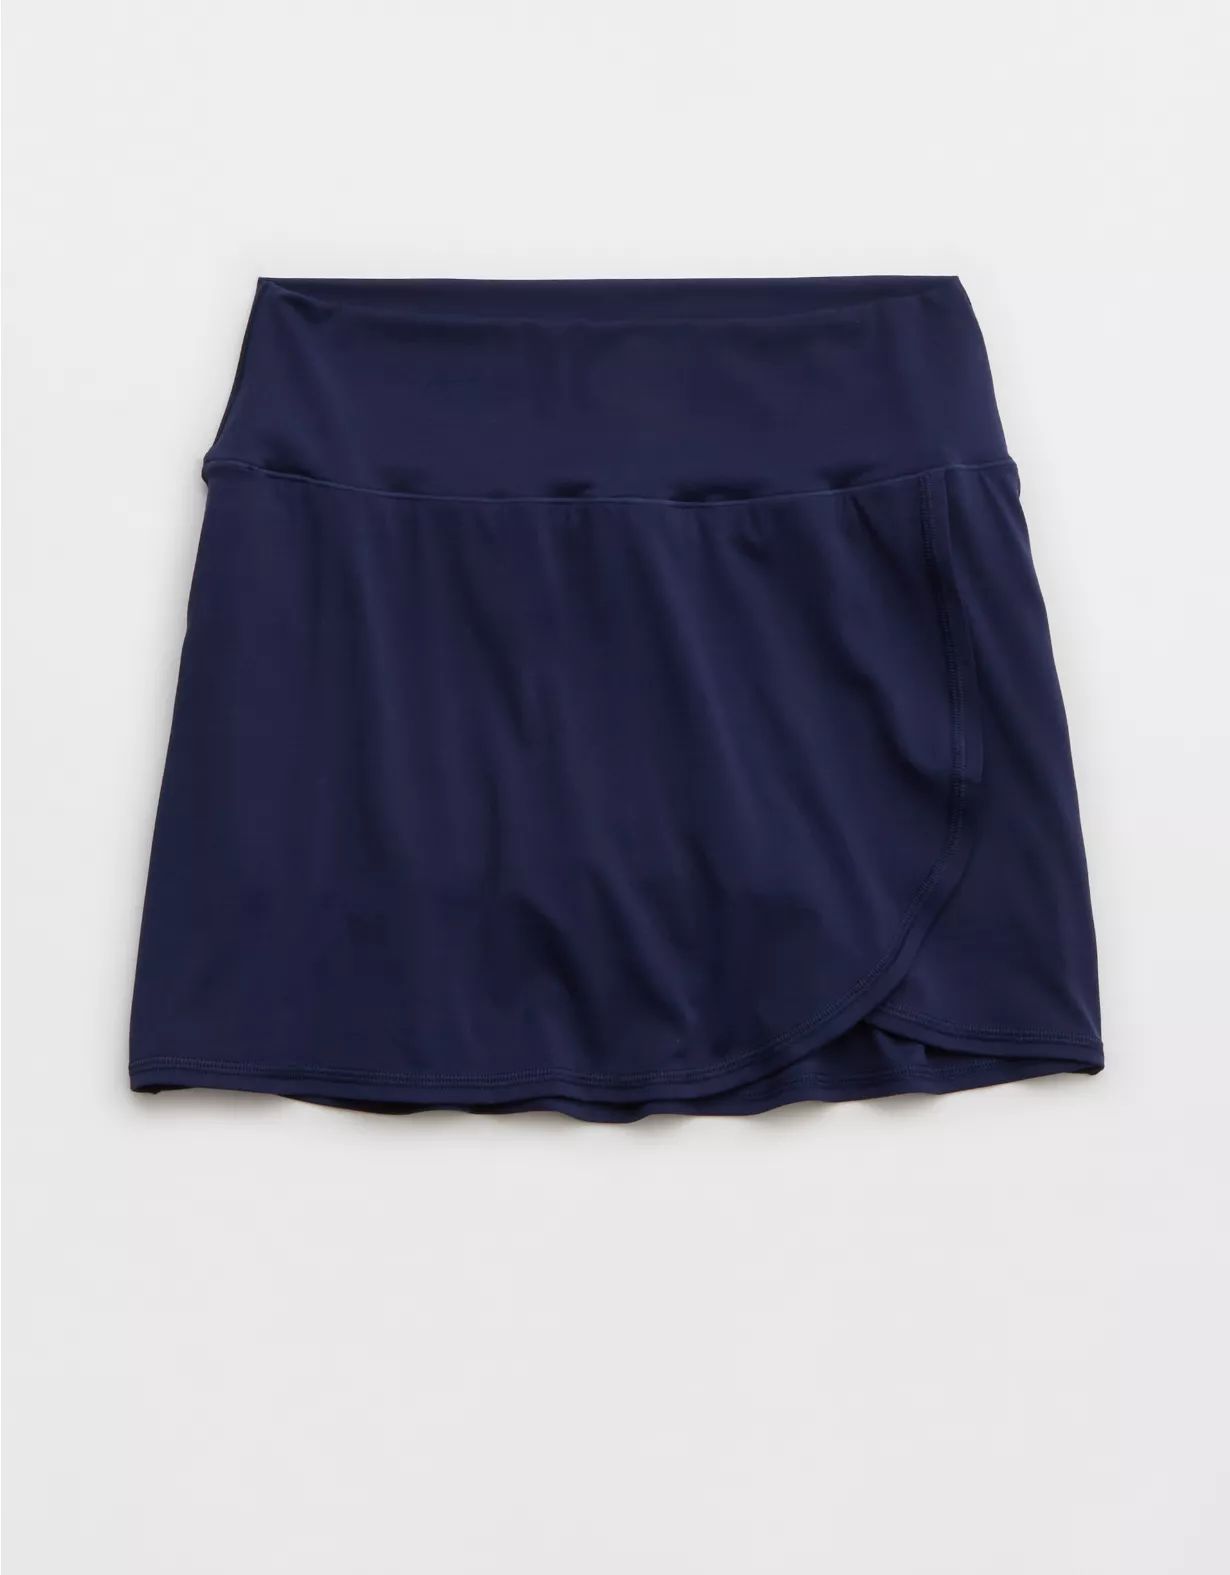 OFFLINE By Aerie Real Me That's A Wrap Skort | Aerie